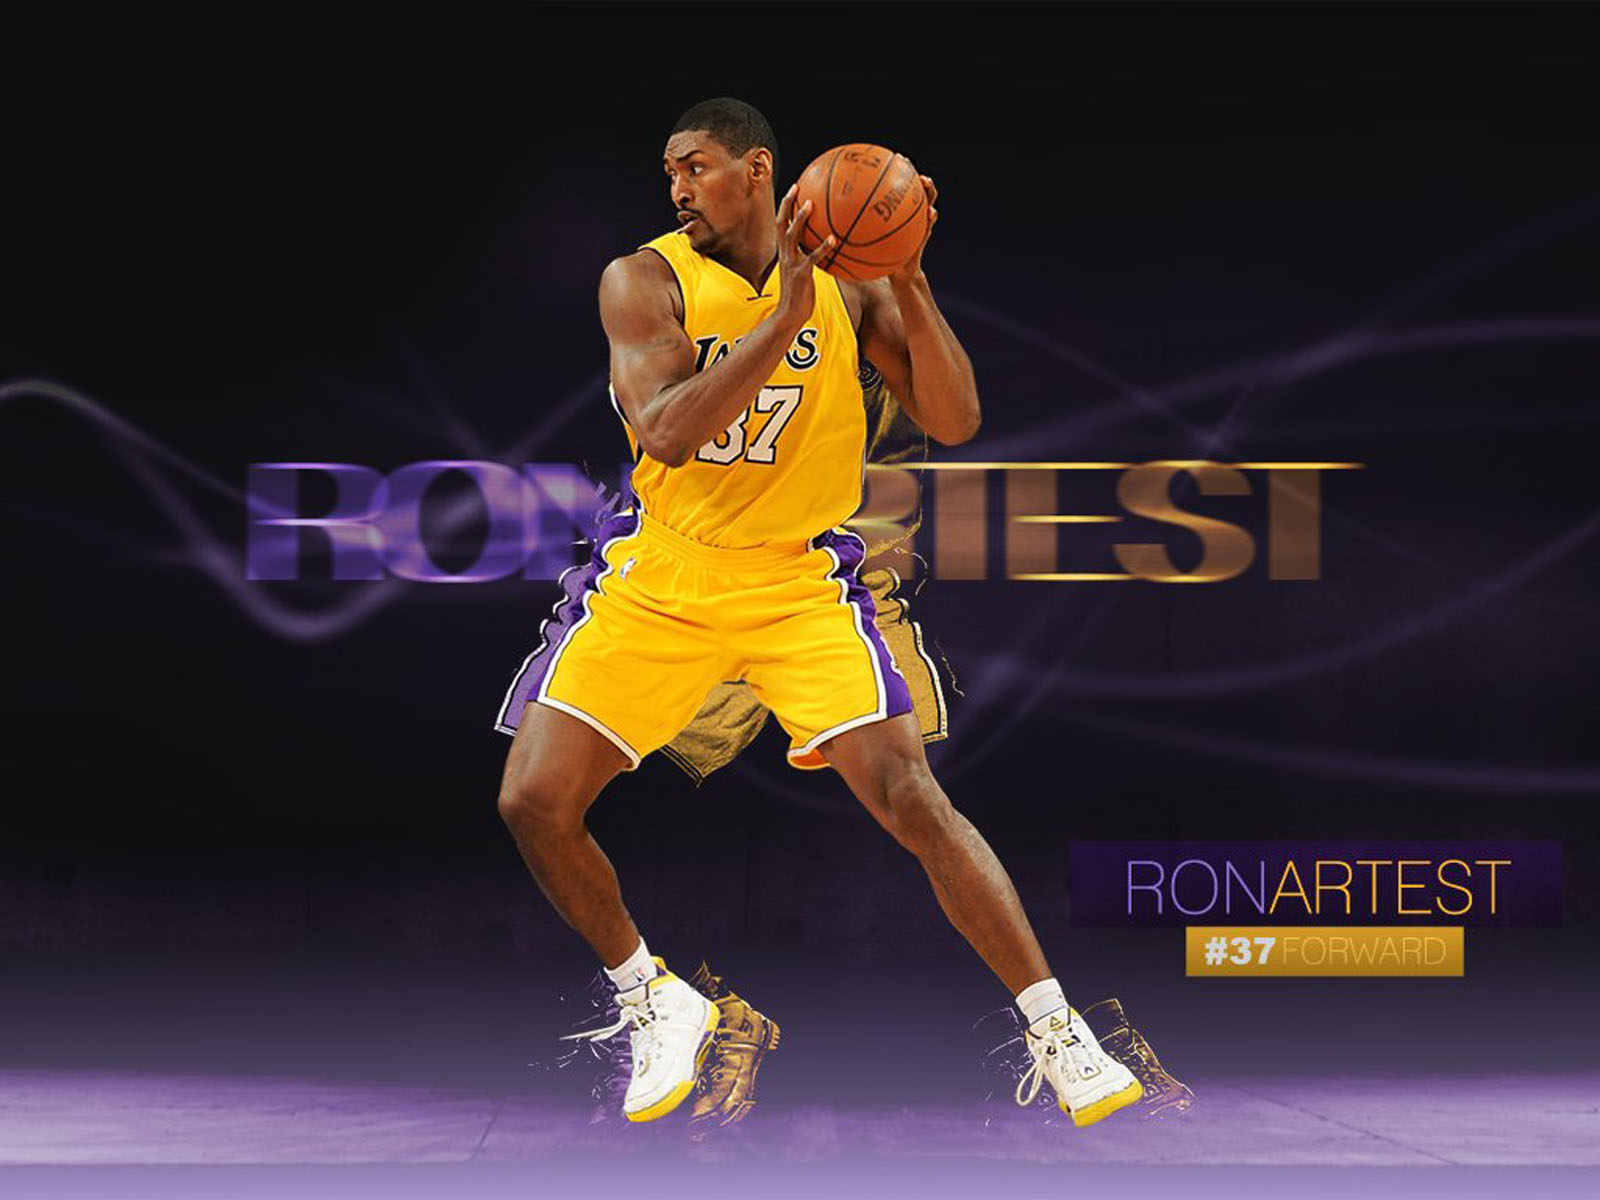 Tag Ron Artest Basket Ball Player Wallpaper Image Photos And